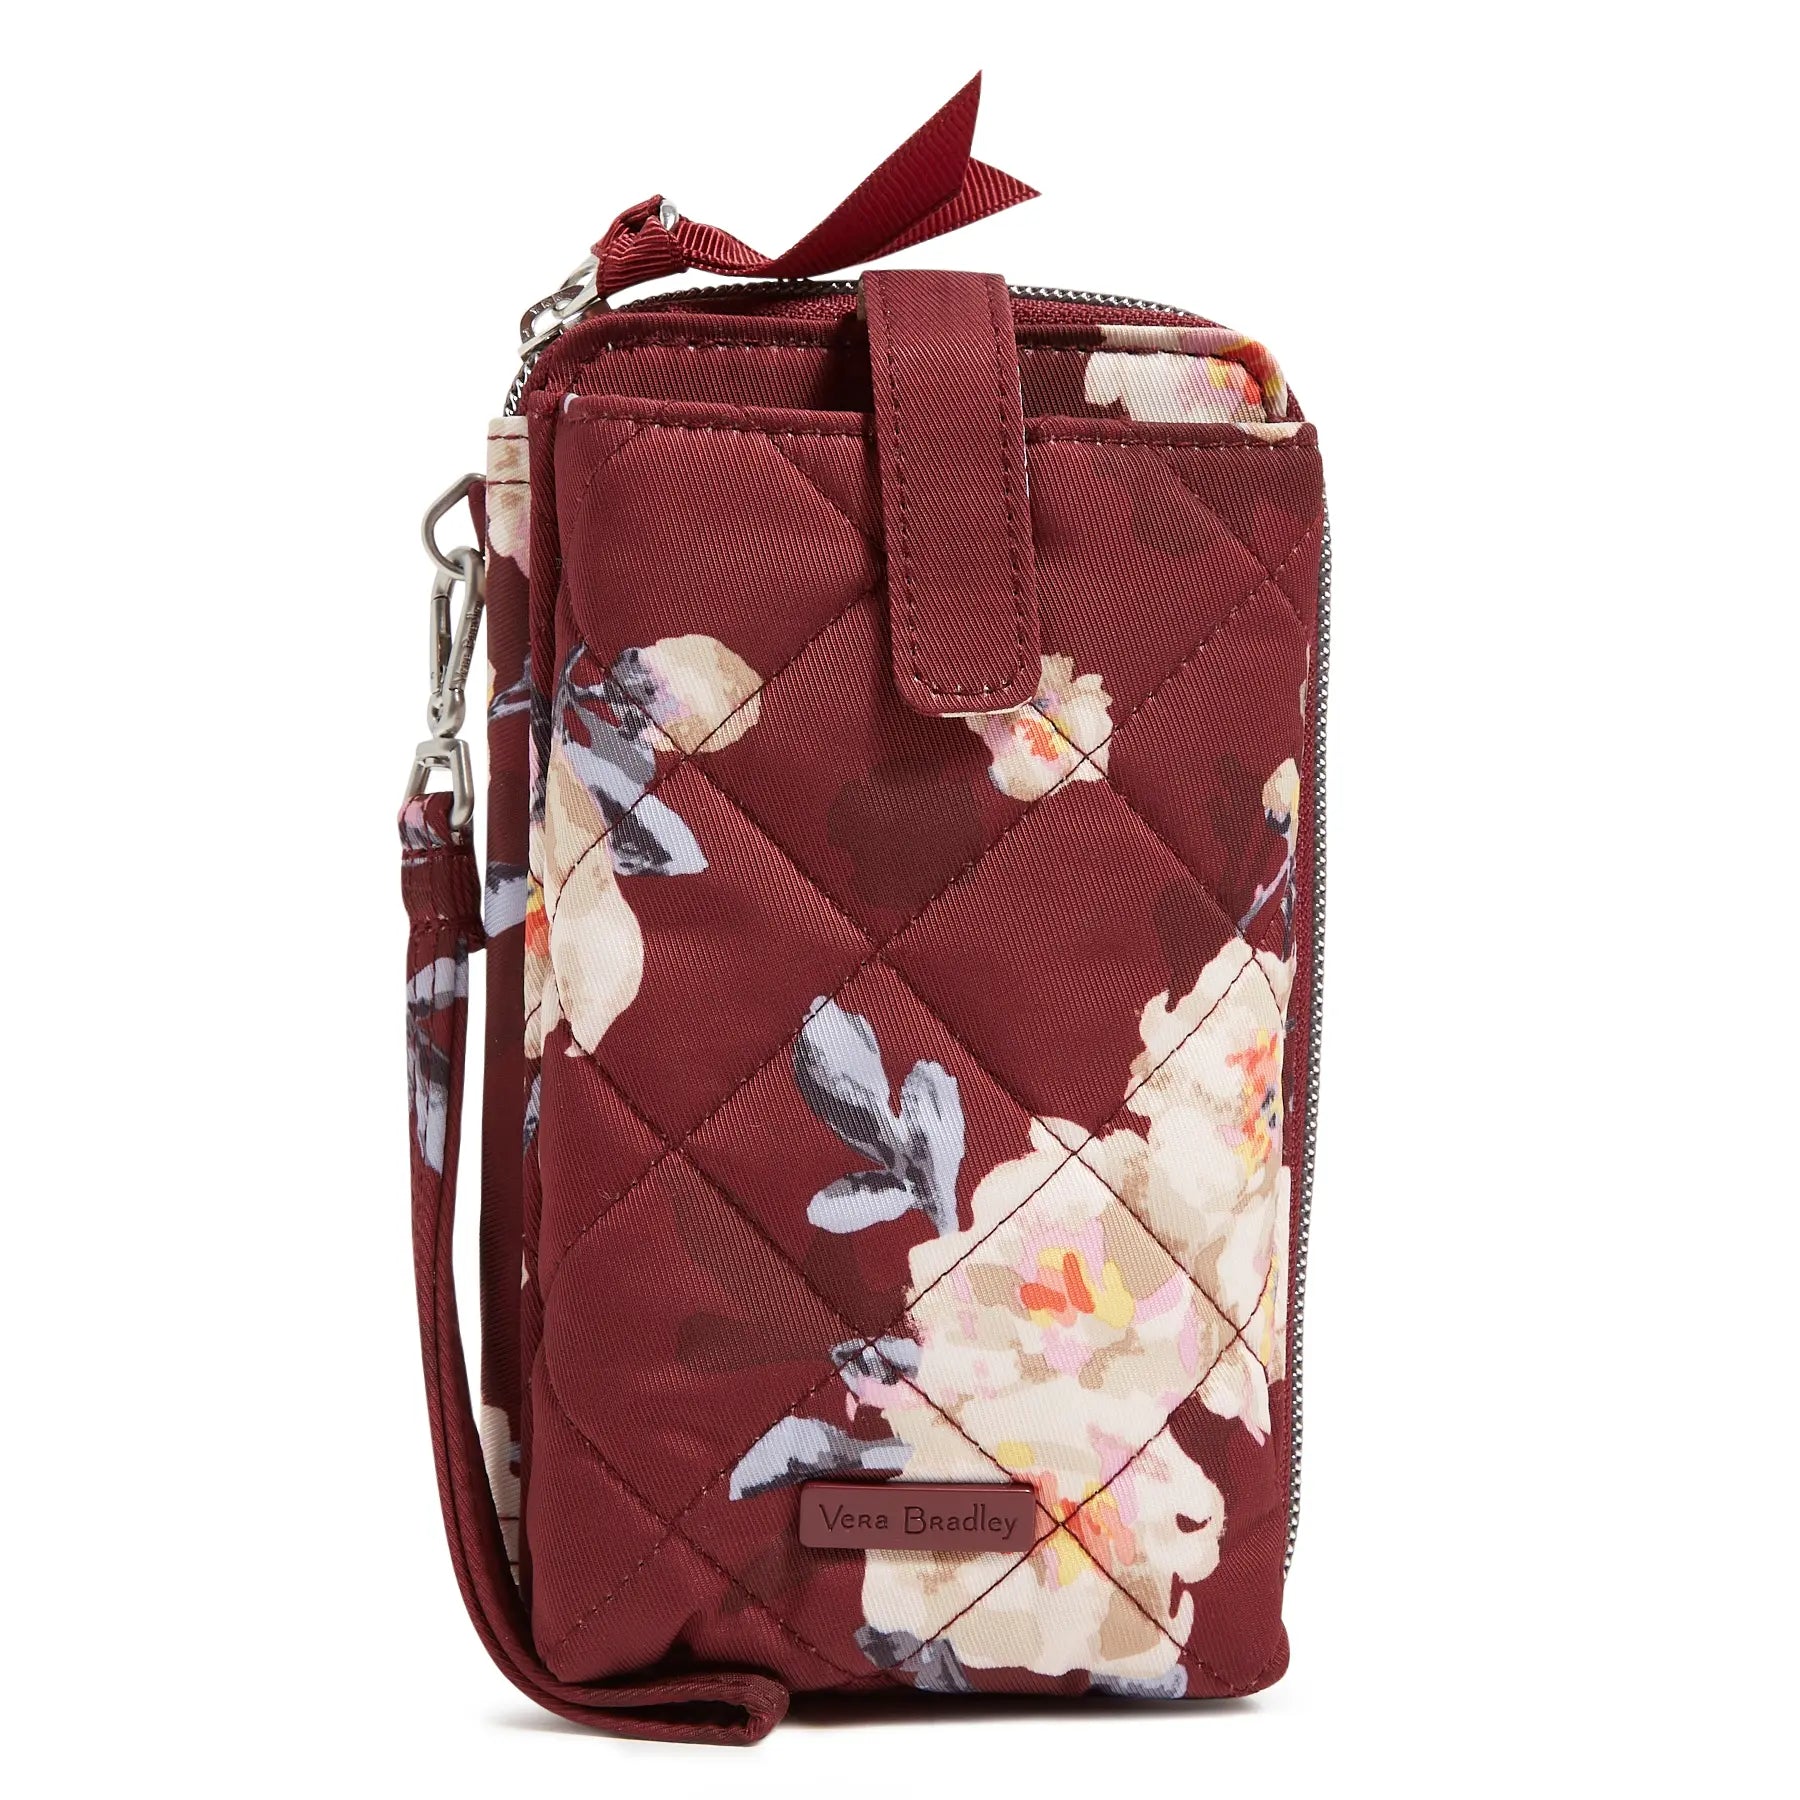 Vera Bradley RFID Large Smartphone Wristlet in Blooms and Branches.